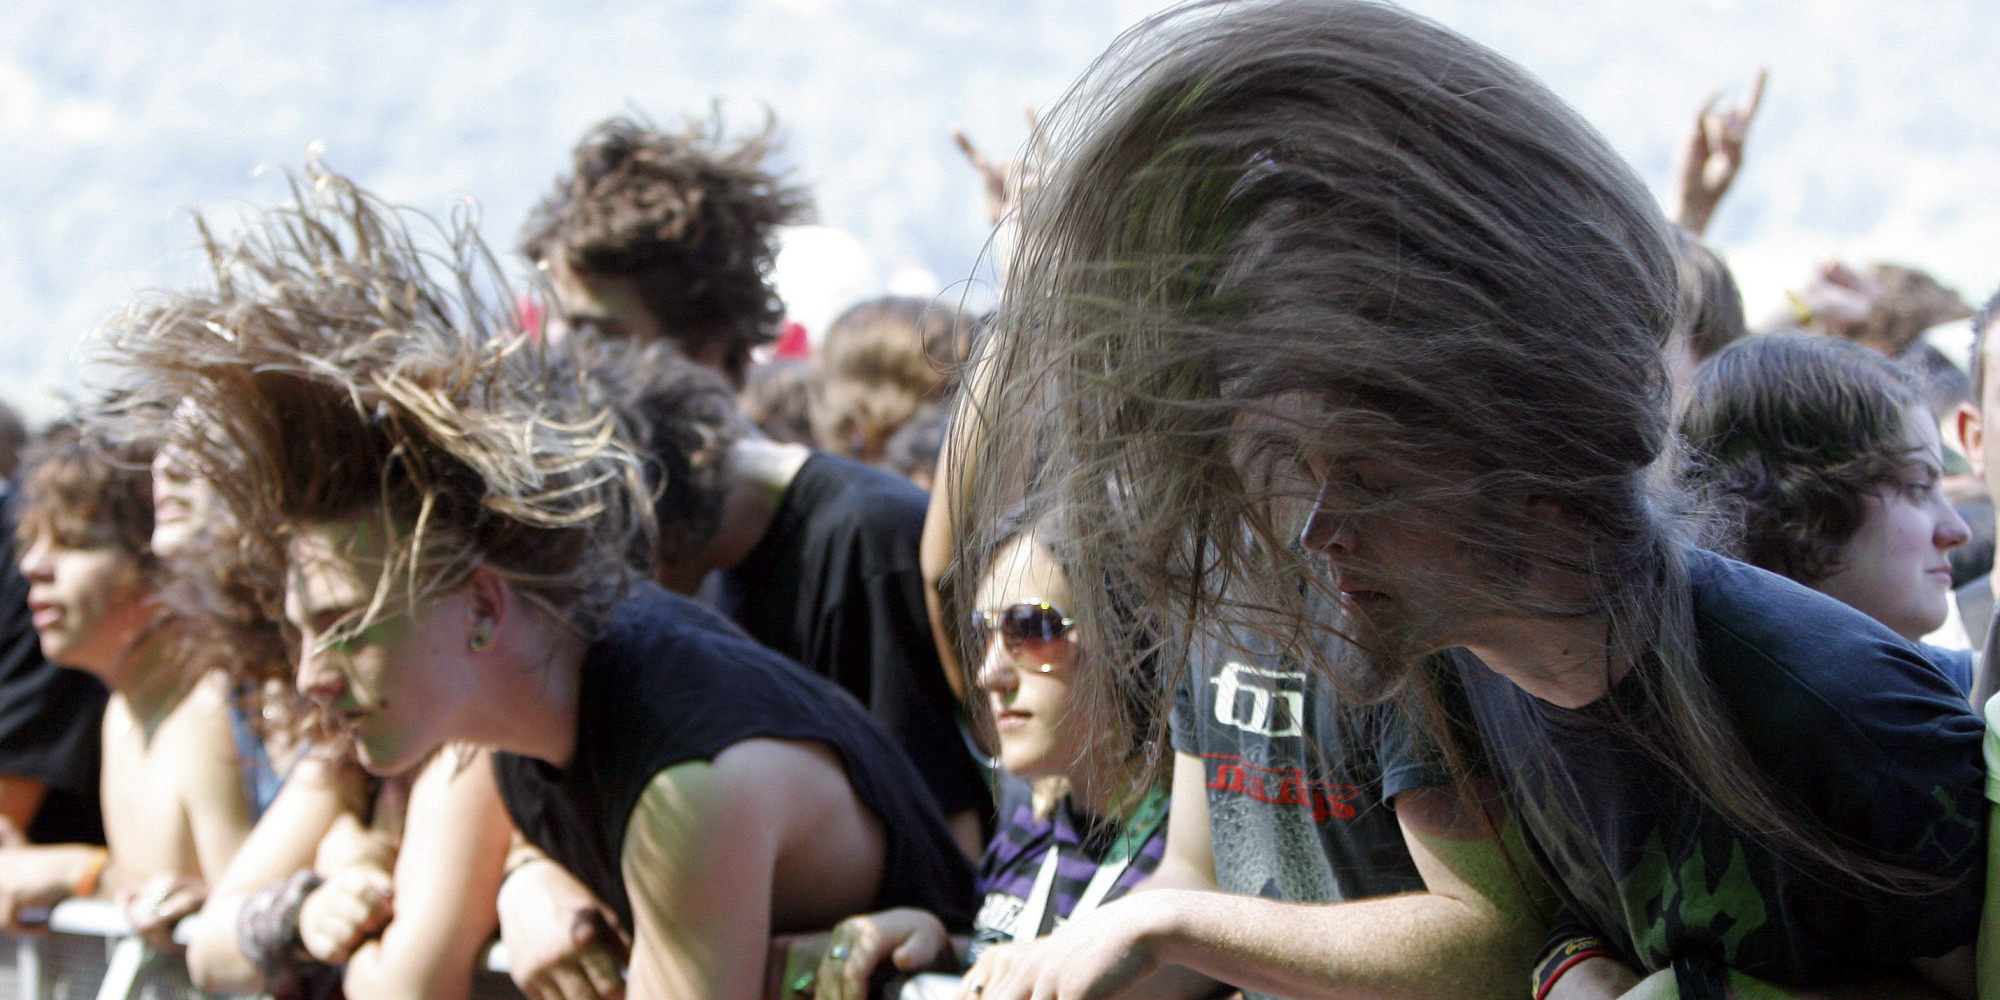 Headbanging at raves means sore neck and back, so we have stretches